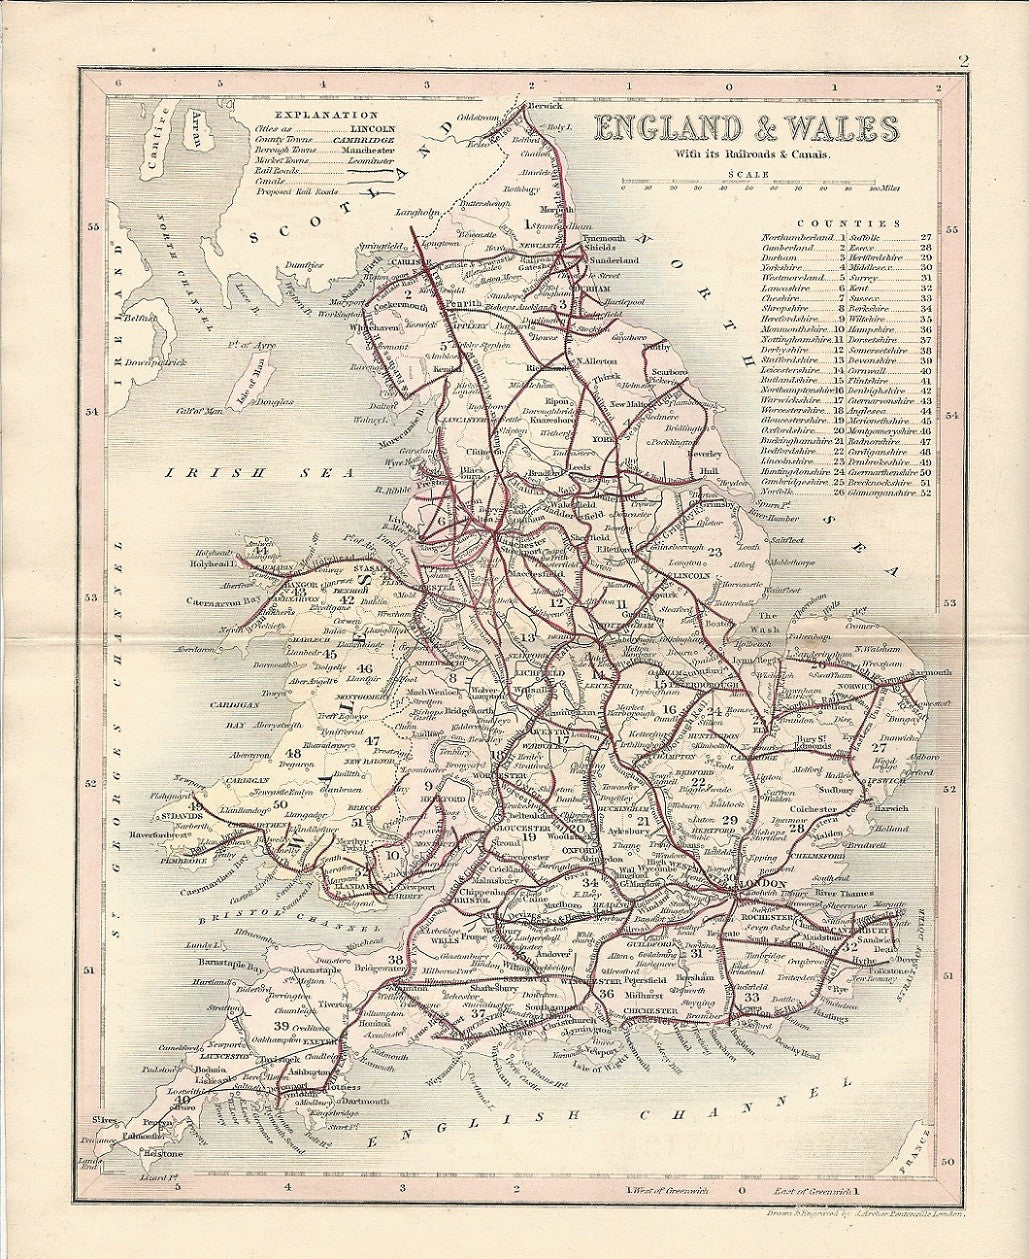 Railways and Canals of England and Wales antique map